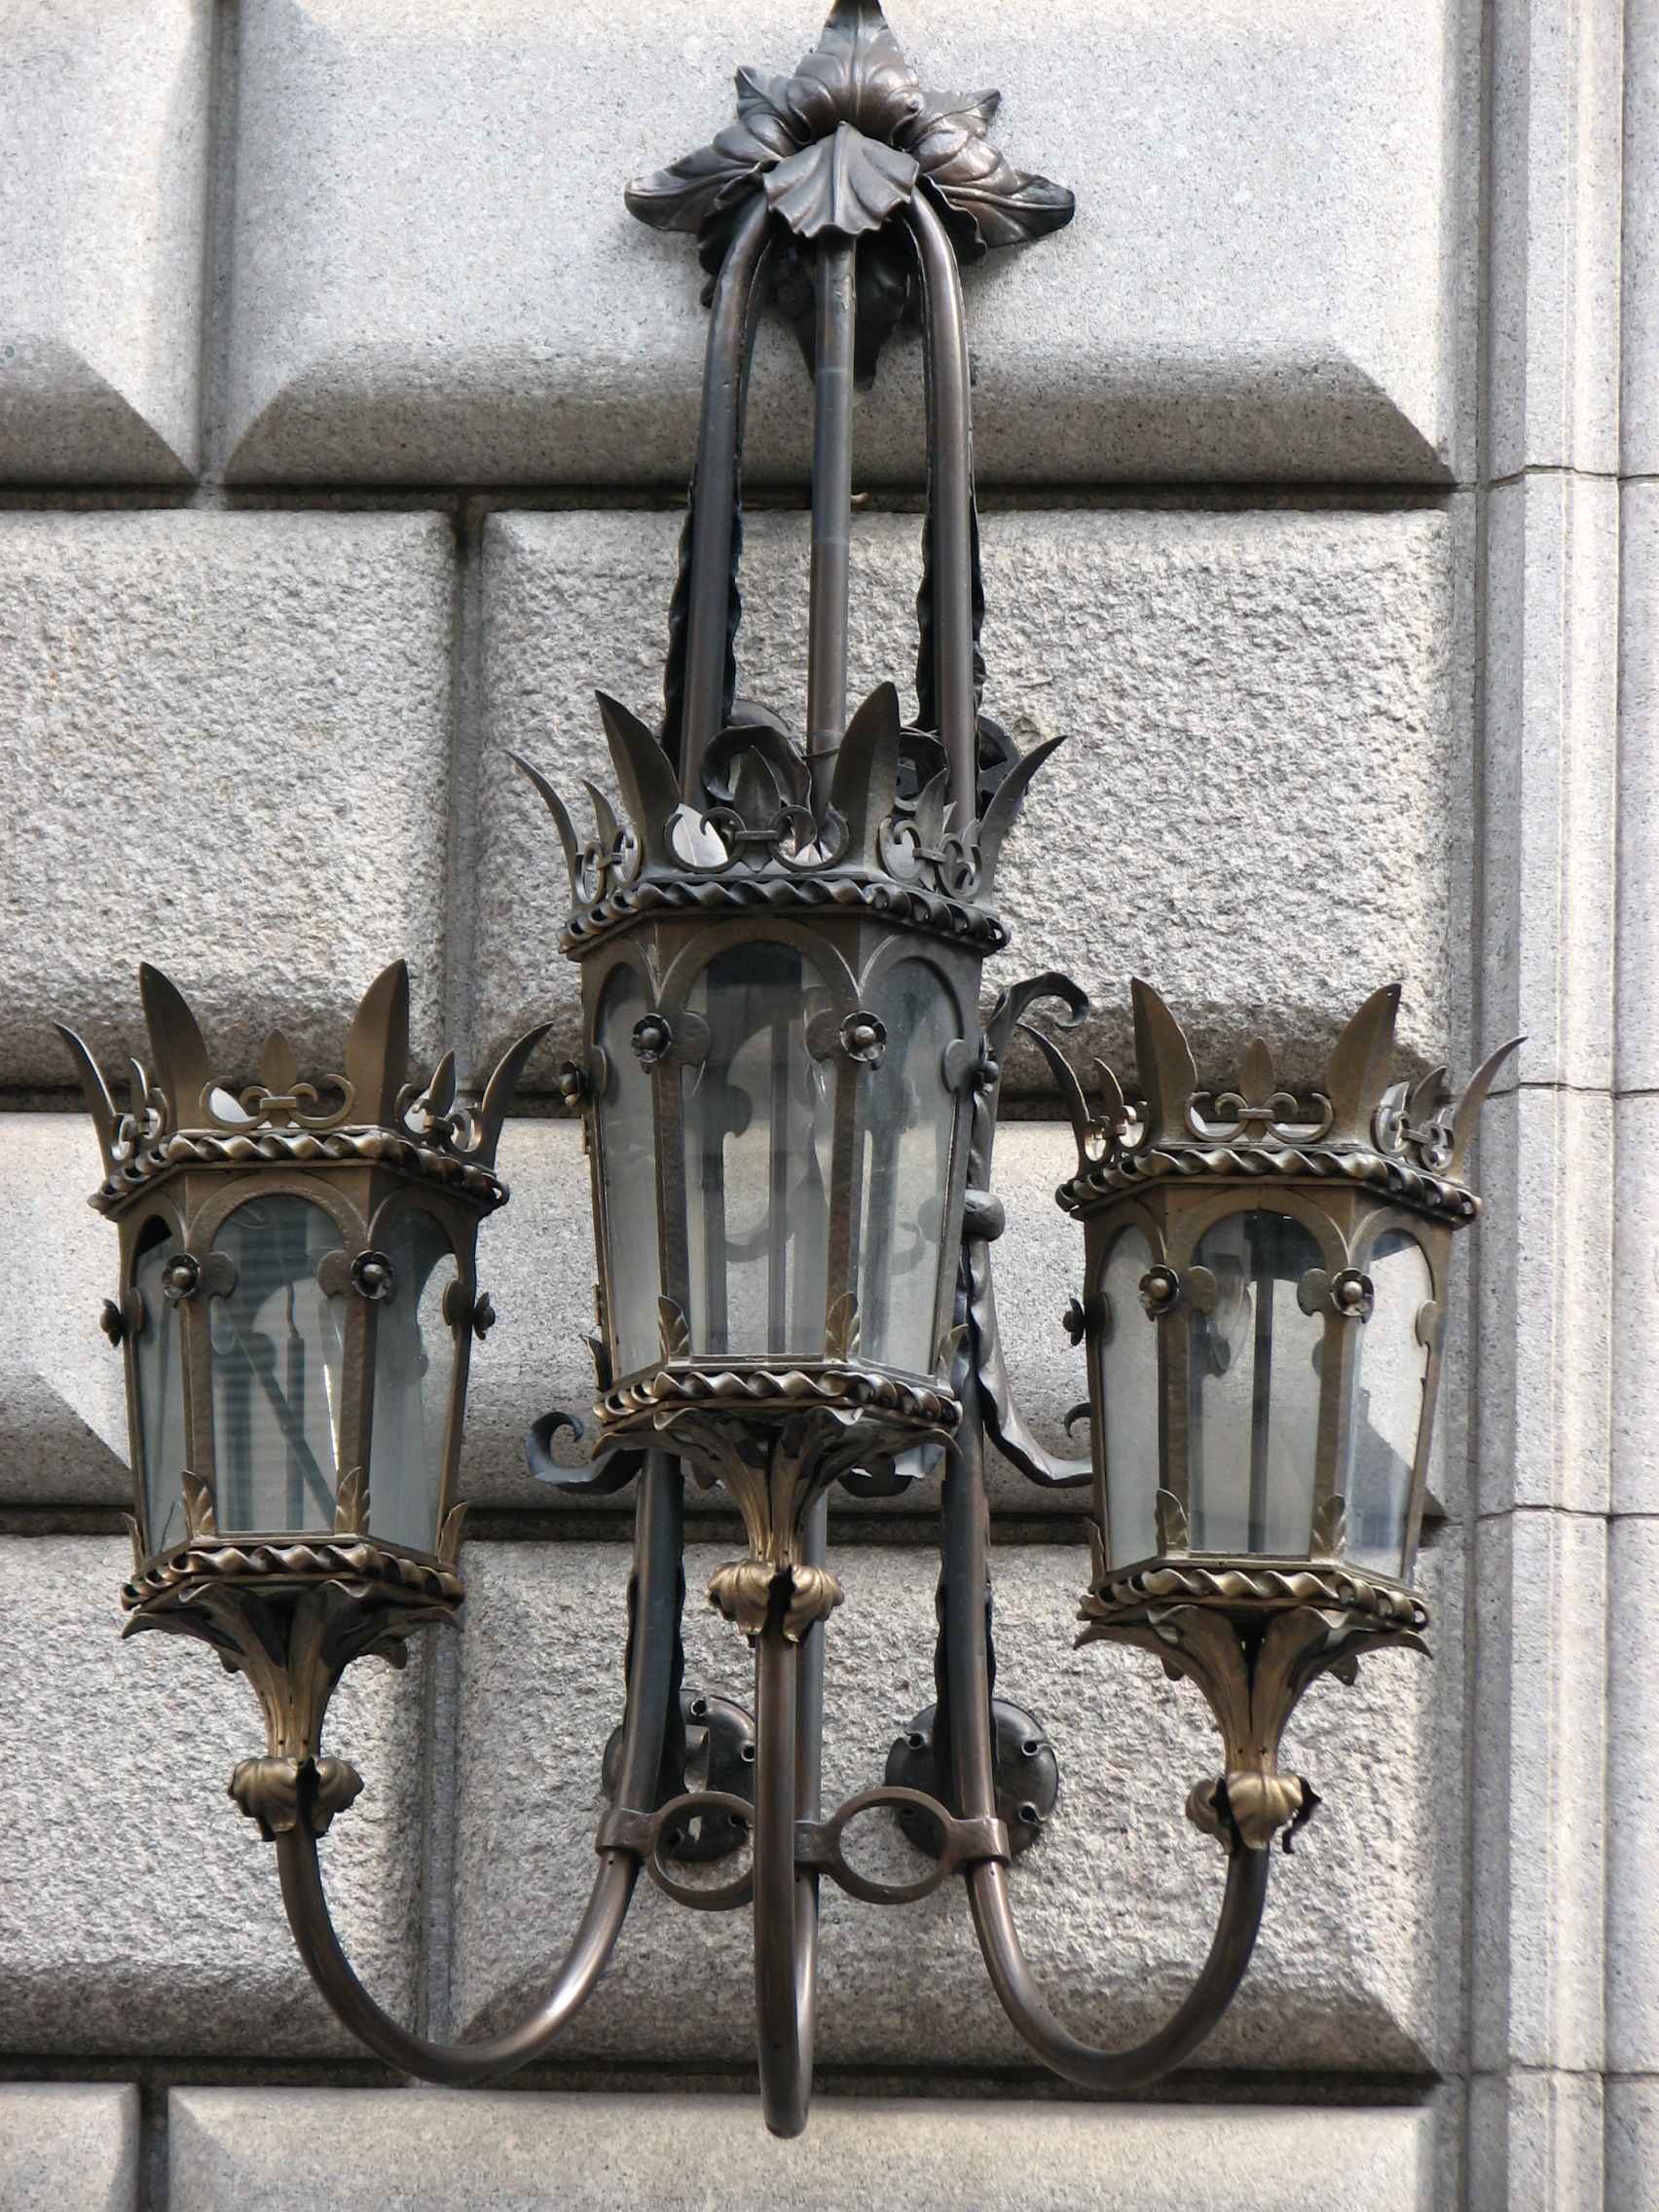 Lamps created by the renowned Philadelphia firm Samuel Yellin Iron Works still hang on either side of the main entrance.